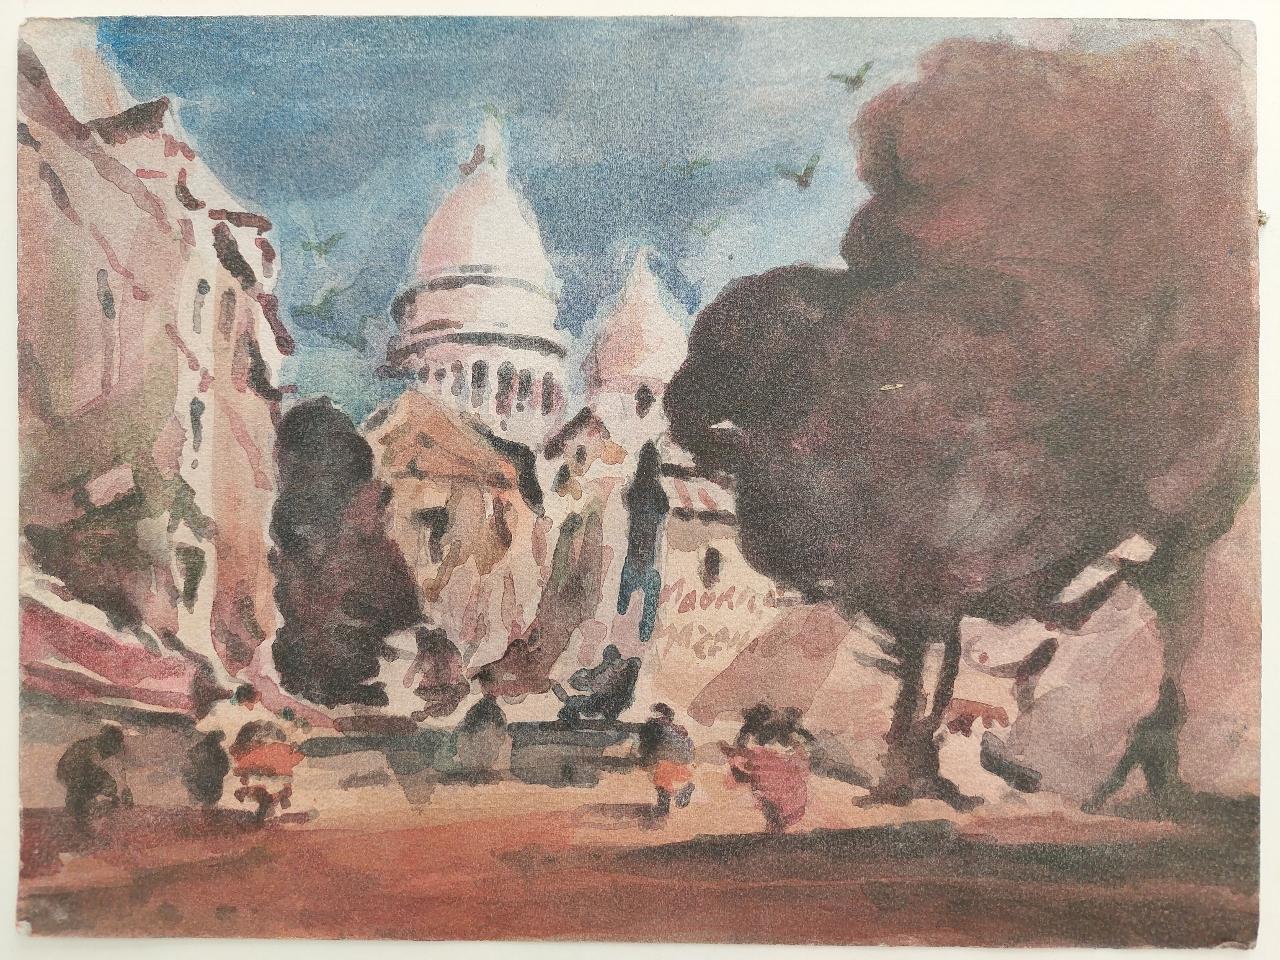 Sacre Coeur, Montmartre, Paris
by Maurice Mazeilie (French, 1924-2021)
watercolor painting on artist paper, unframed
signed centrally (on the side of the building)
stamped verso
dated verso for 2013, so this was painted at the tail end of his